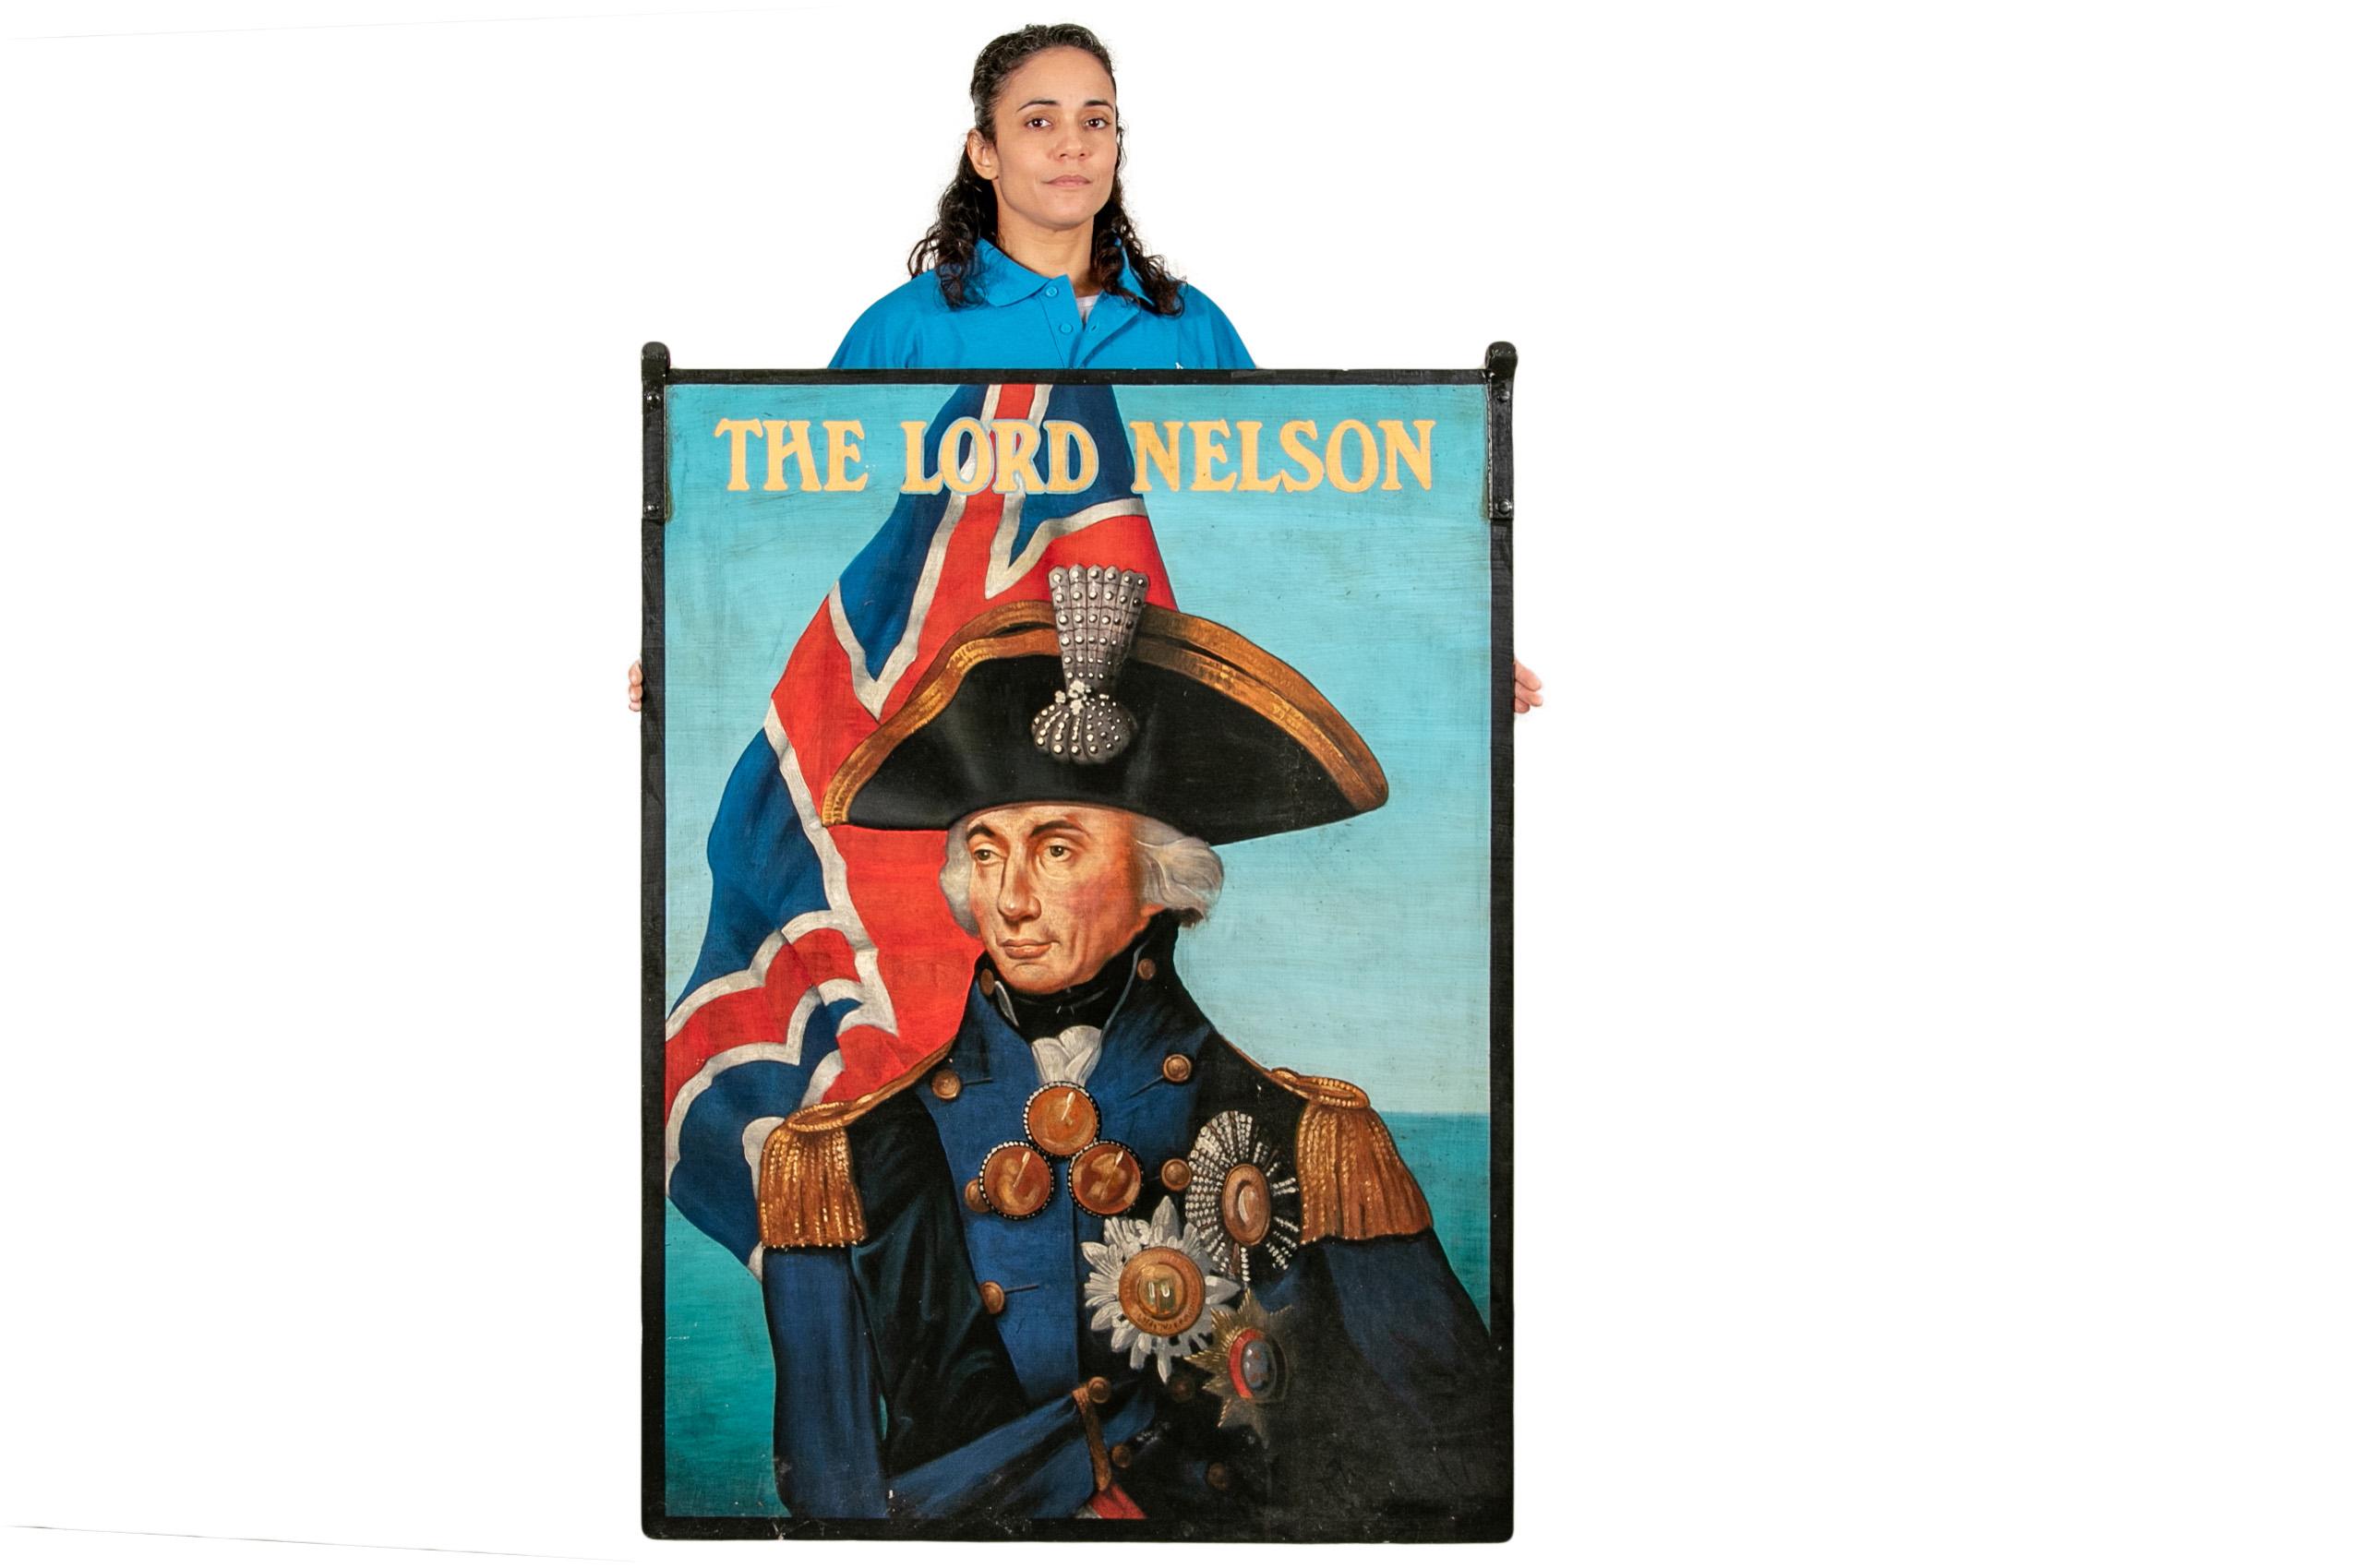 Heavy painted iron with loops on the top ends for suspension. Vibrant color, excellent images and great weight.
One side painted with the image of Admiral Lord Nelson in the uniform he wore at the Battle of Trafalgar, on a blue background.
The